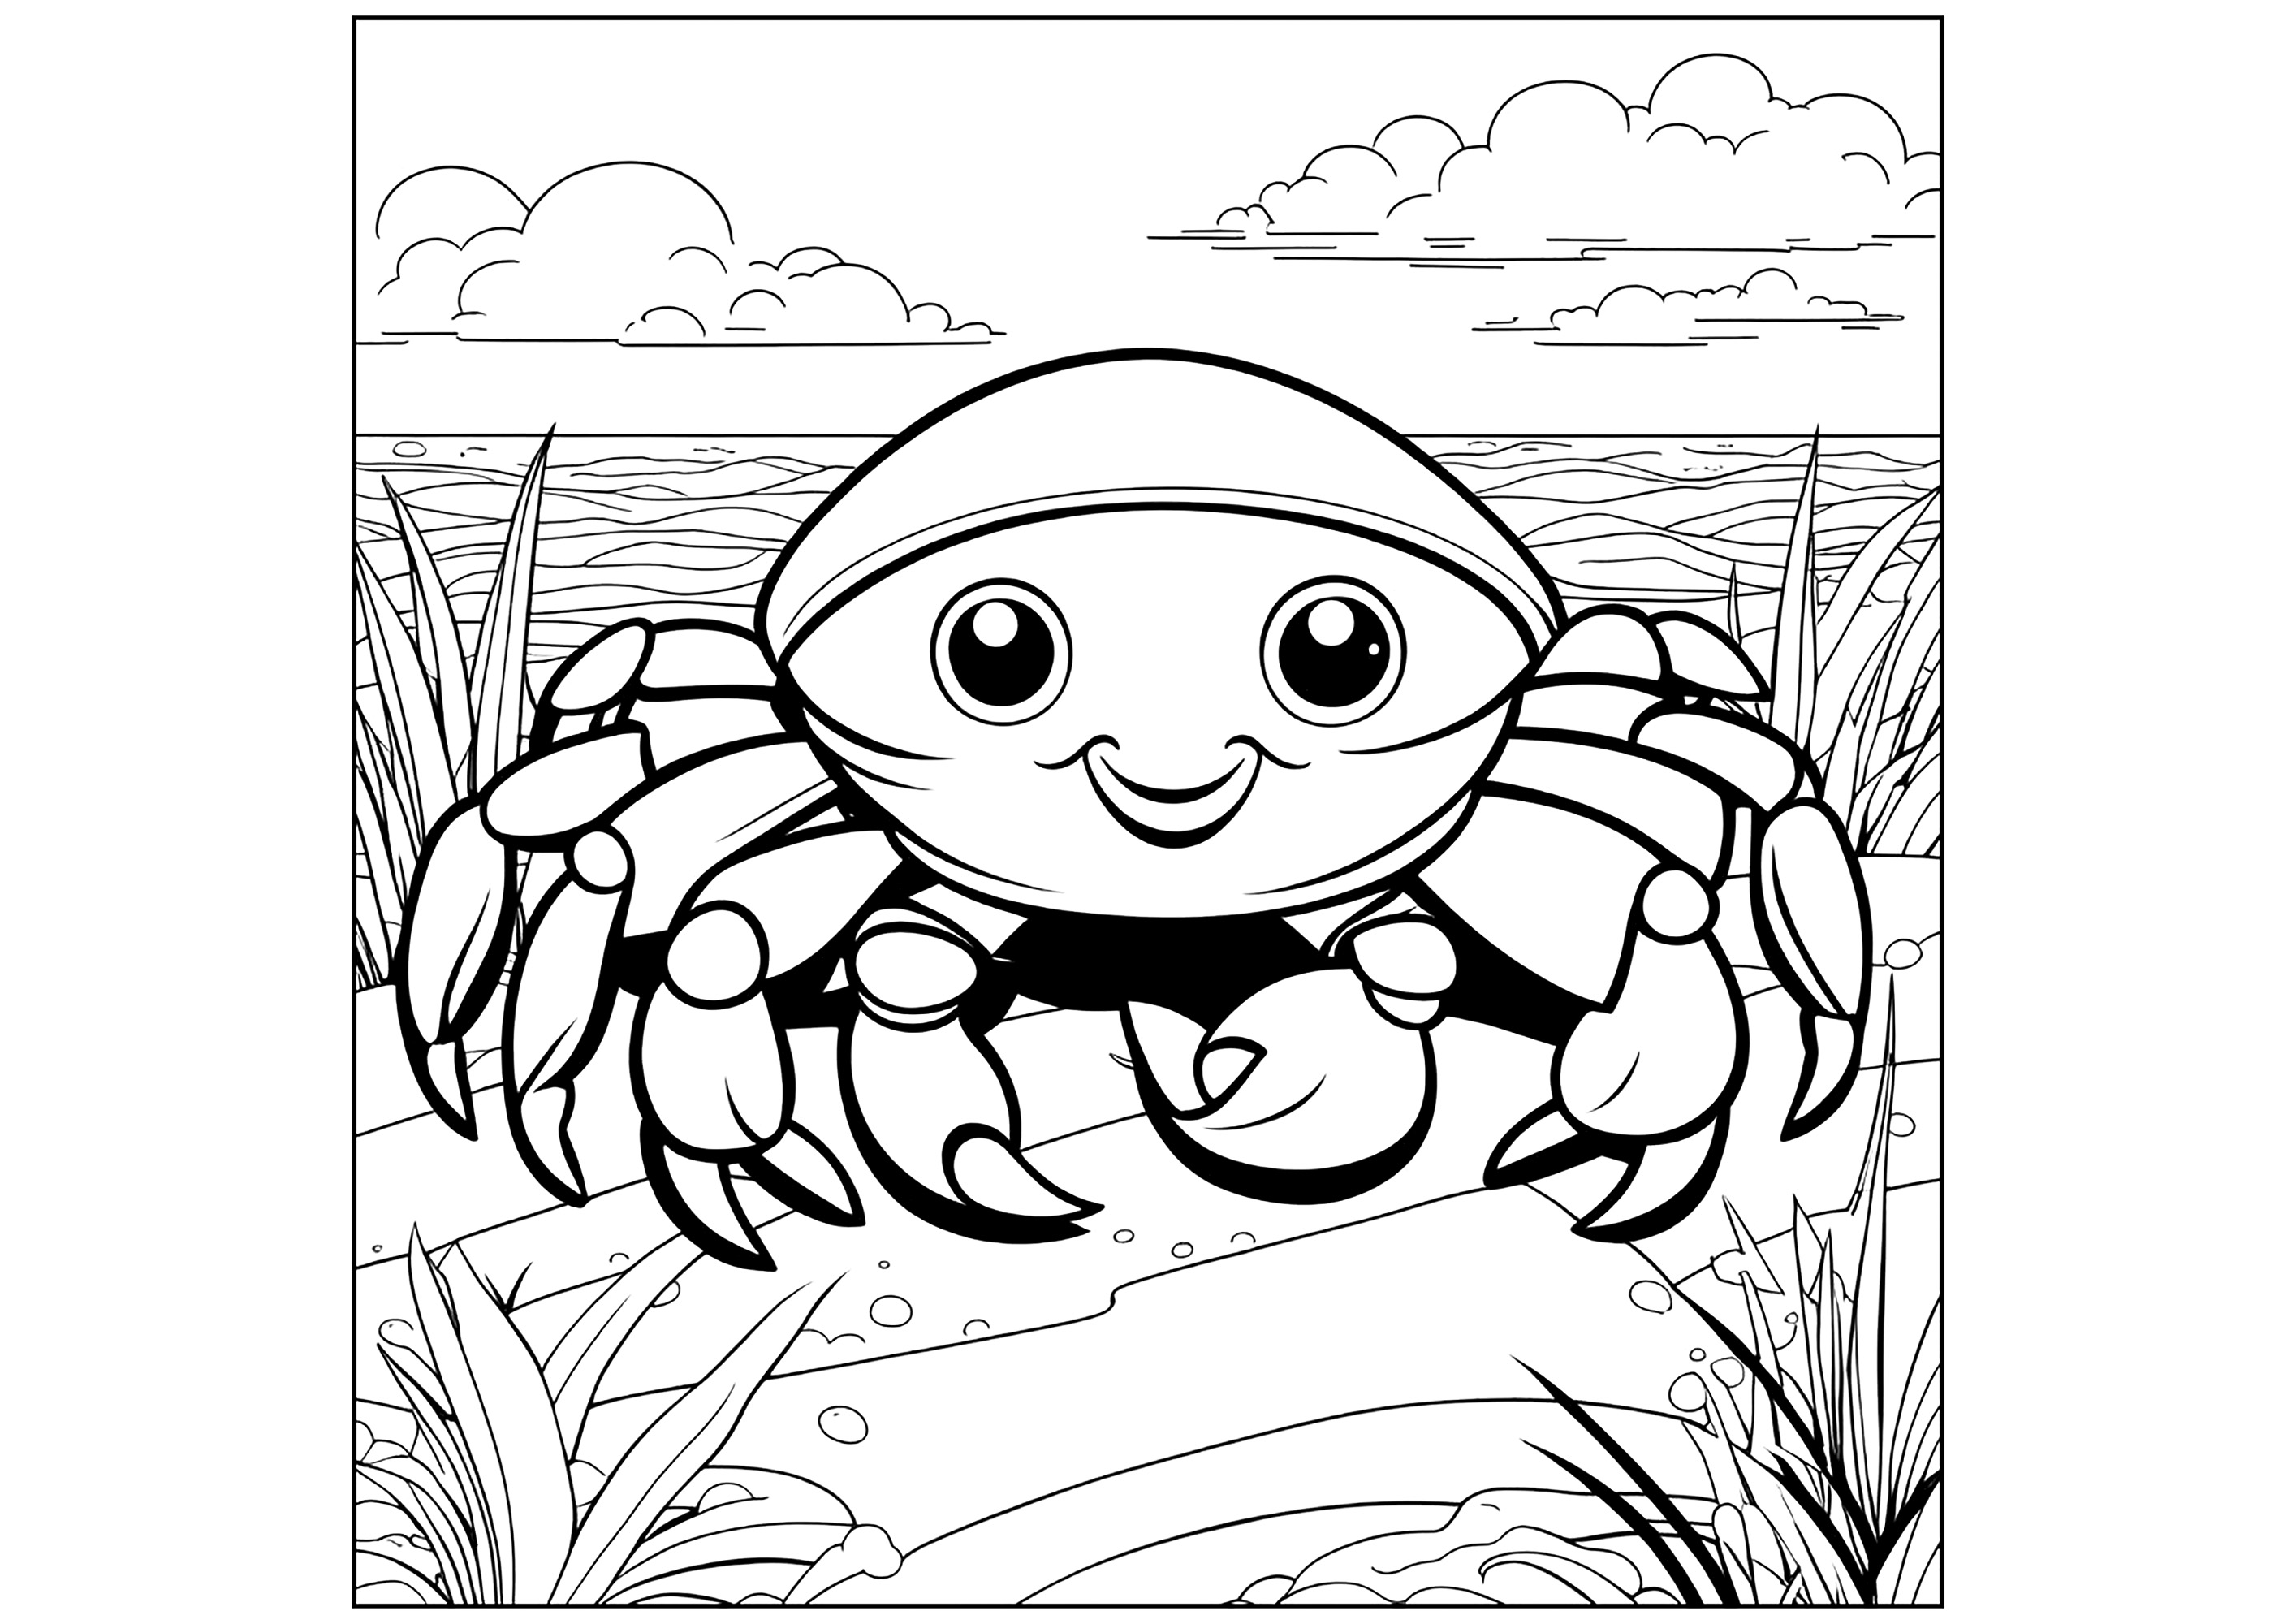 Cute little crab to color